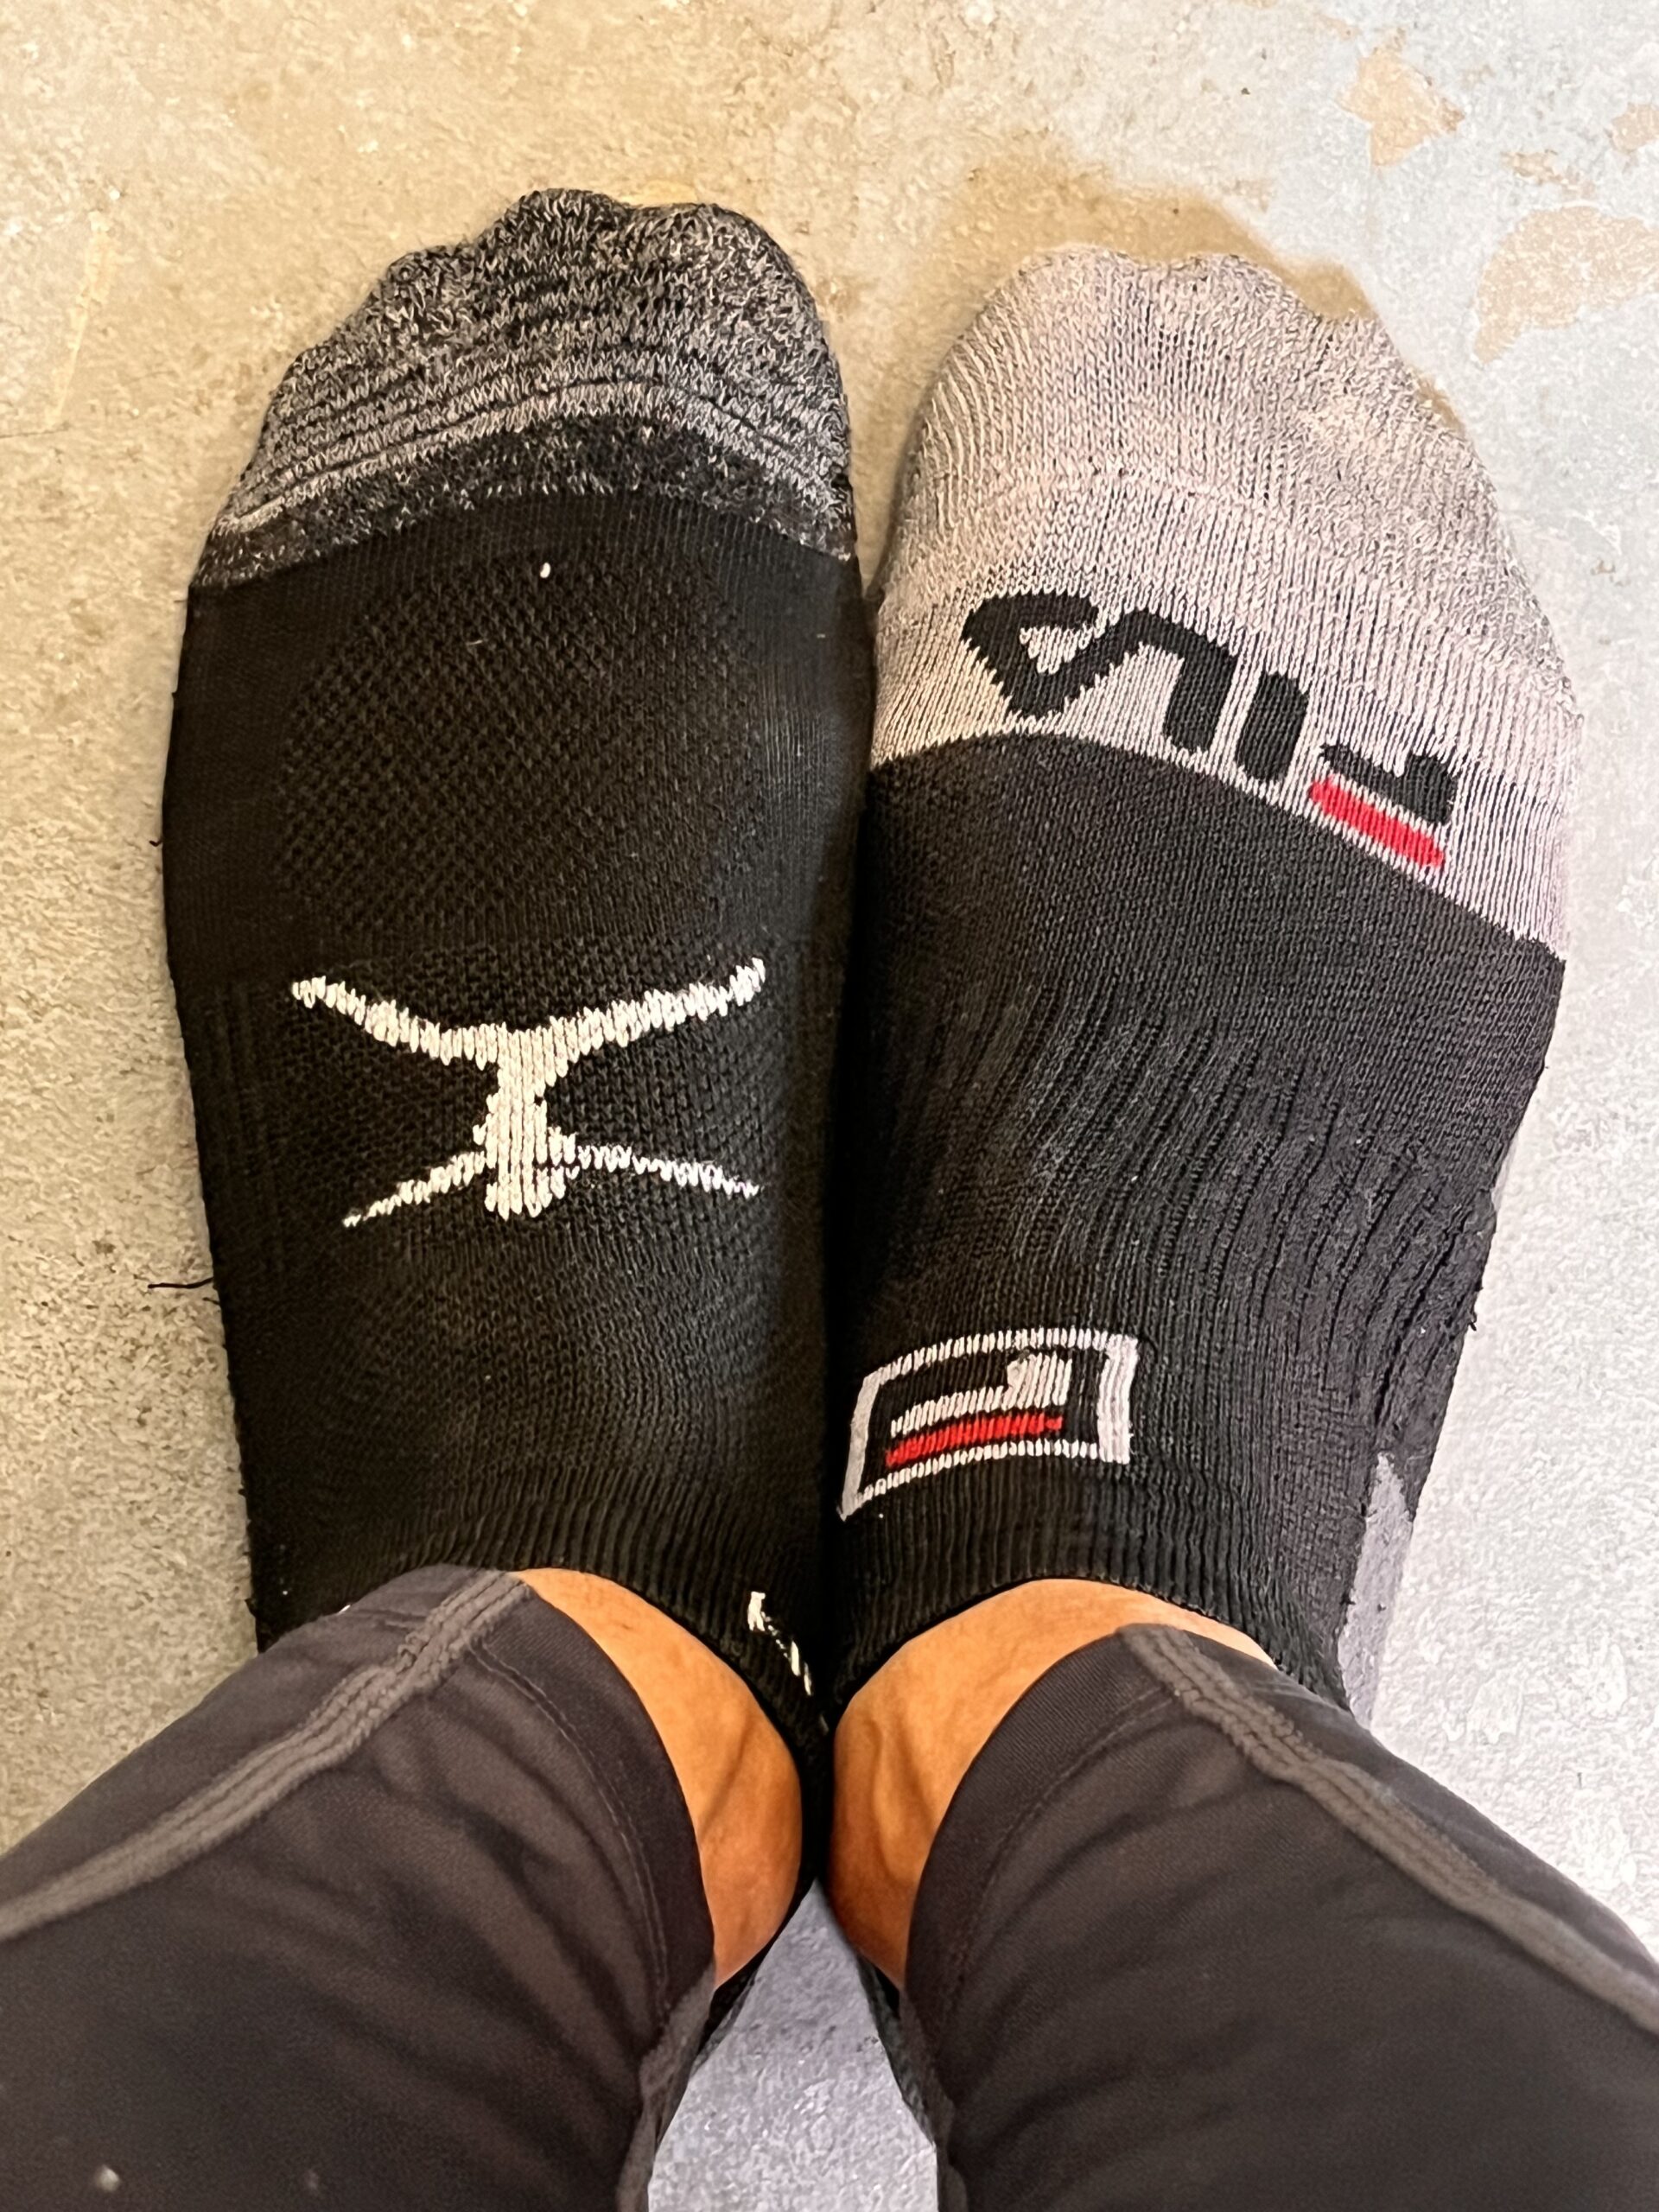 Pictured are two socks that don't match.